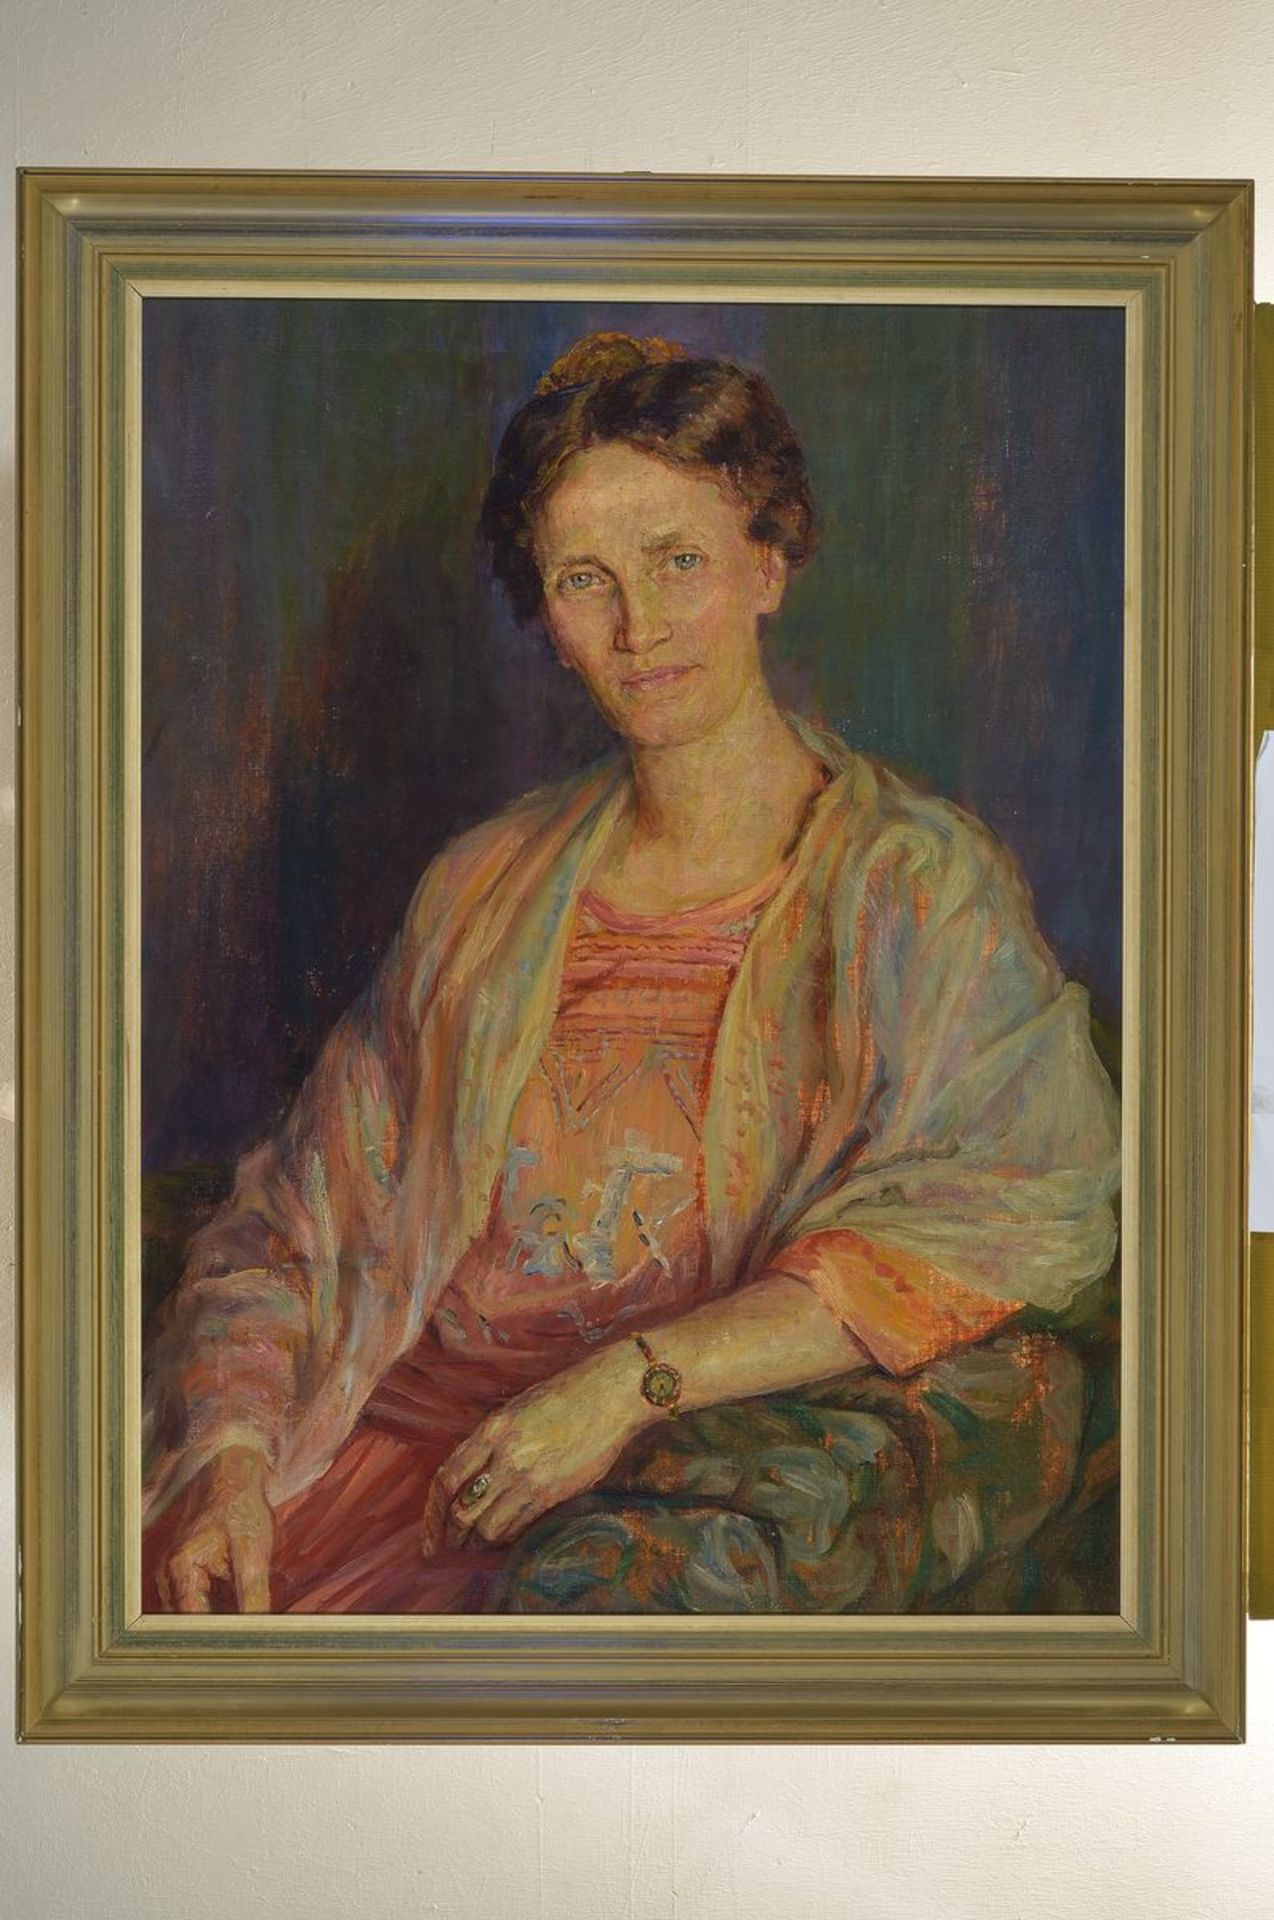 Munich portrait painter, 1920s / 30s, lady with wristwatch, high materiality, - Image 2 of 2